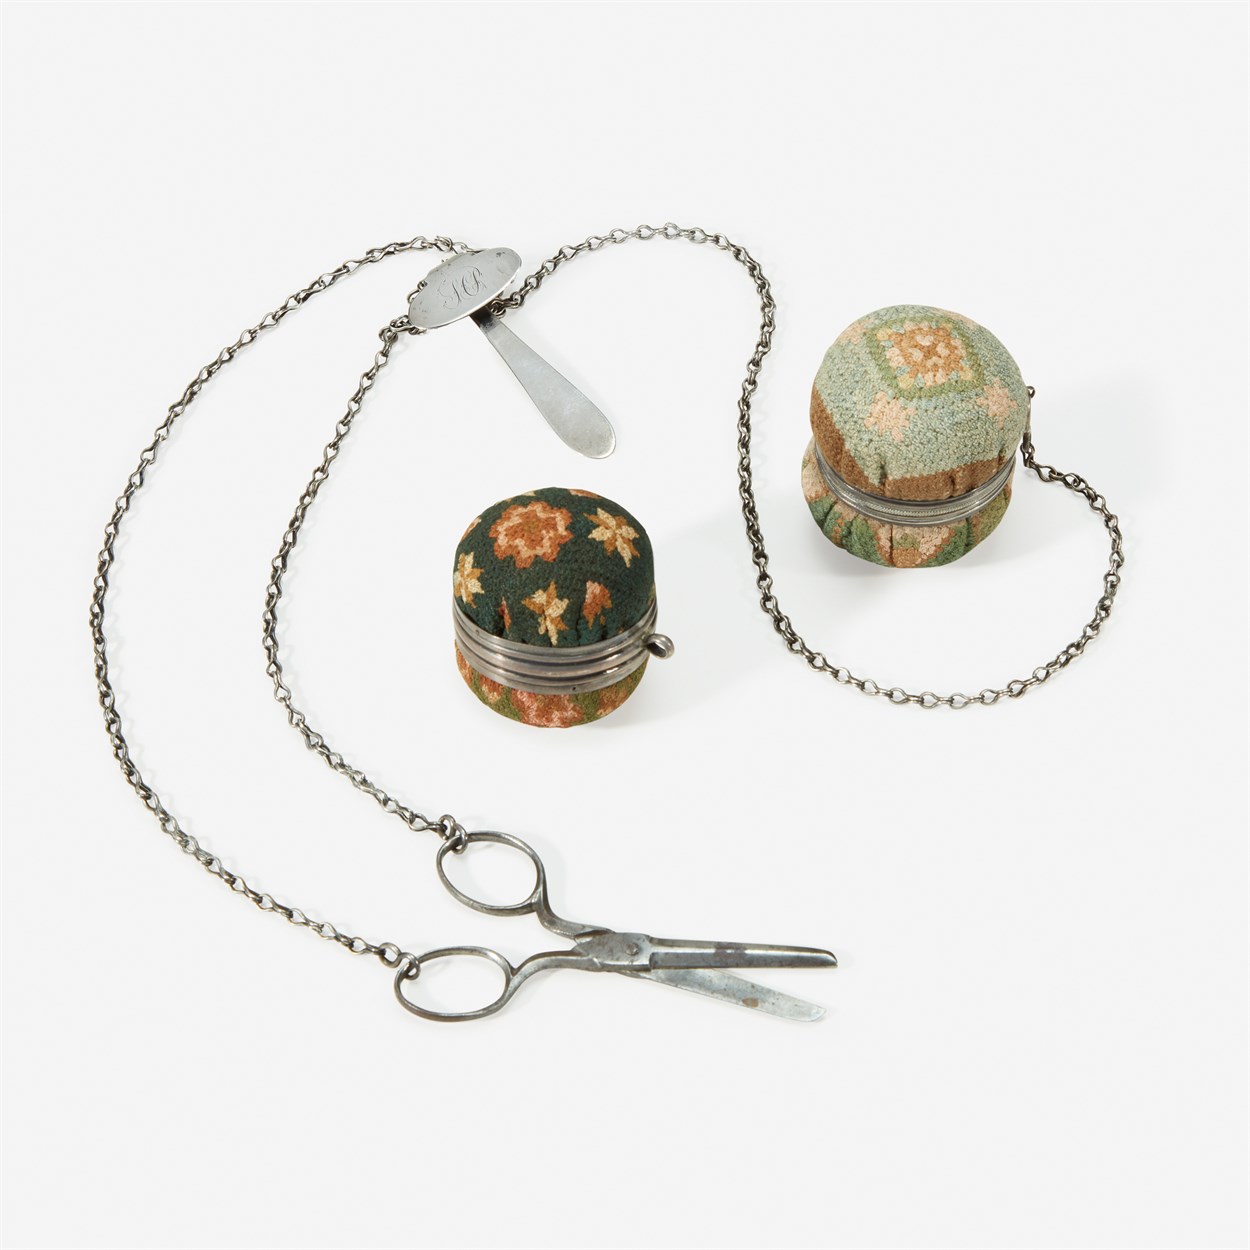 Lot 25 - A silver chatelaine with Queen-stitch pin ball